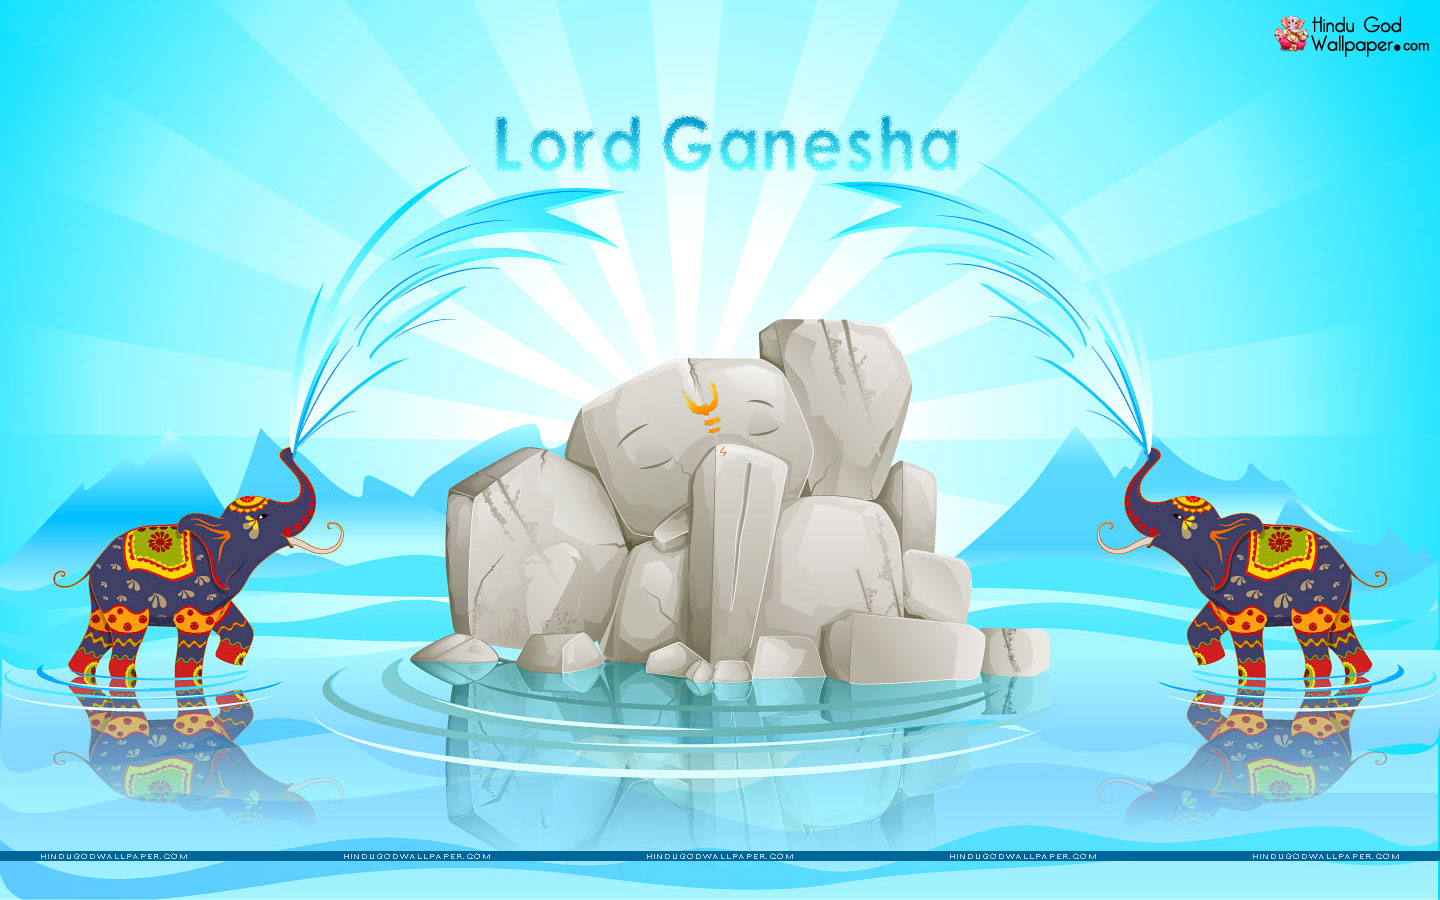 Lord Ganesha Wallpapers HD High Definition Download